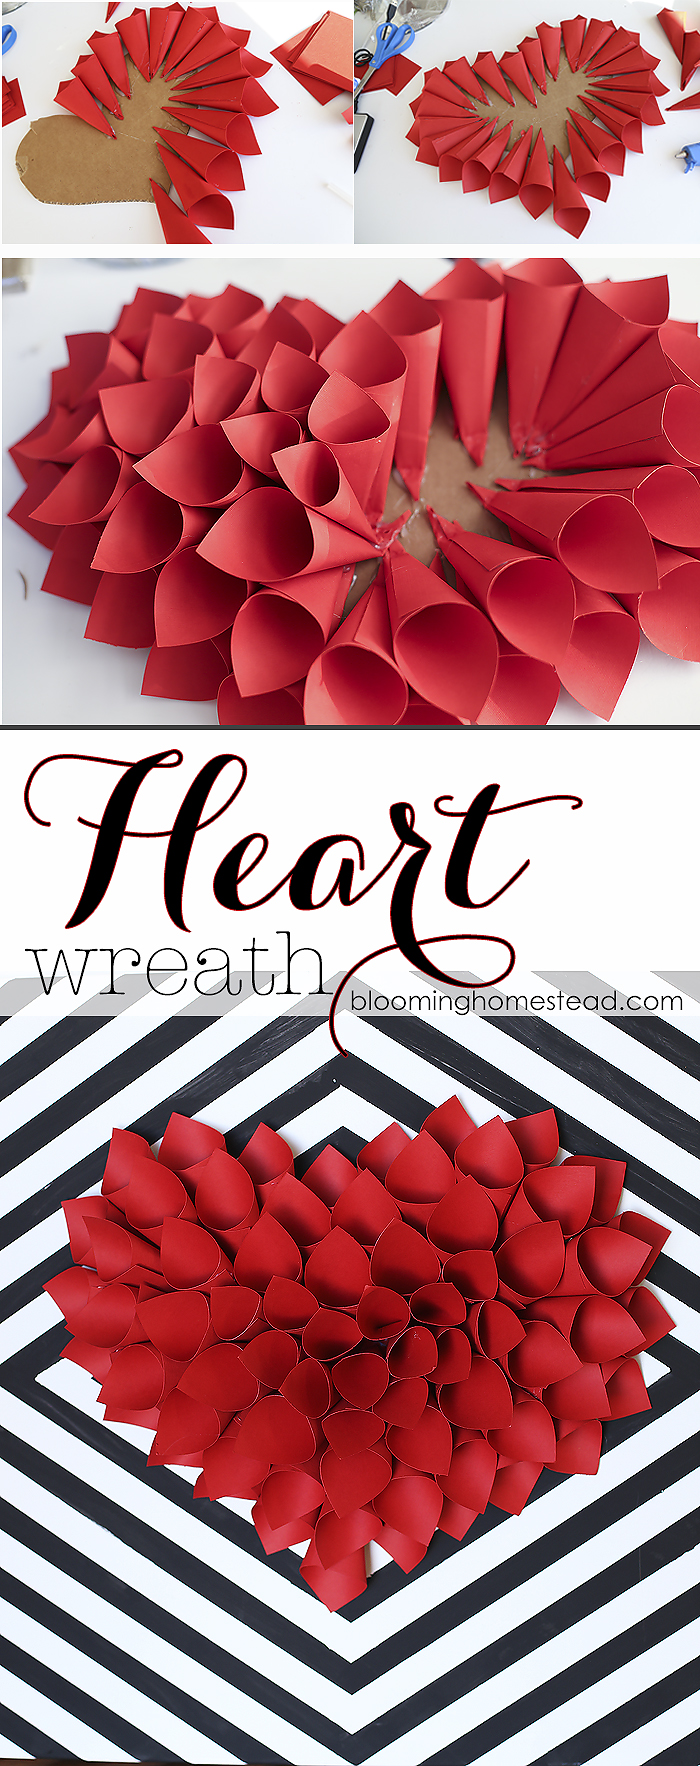 Simple and easy wreath tutorial, this would be perfect for Valentine's Day decor!